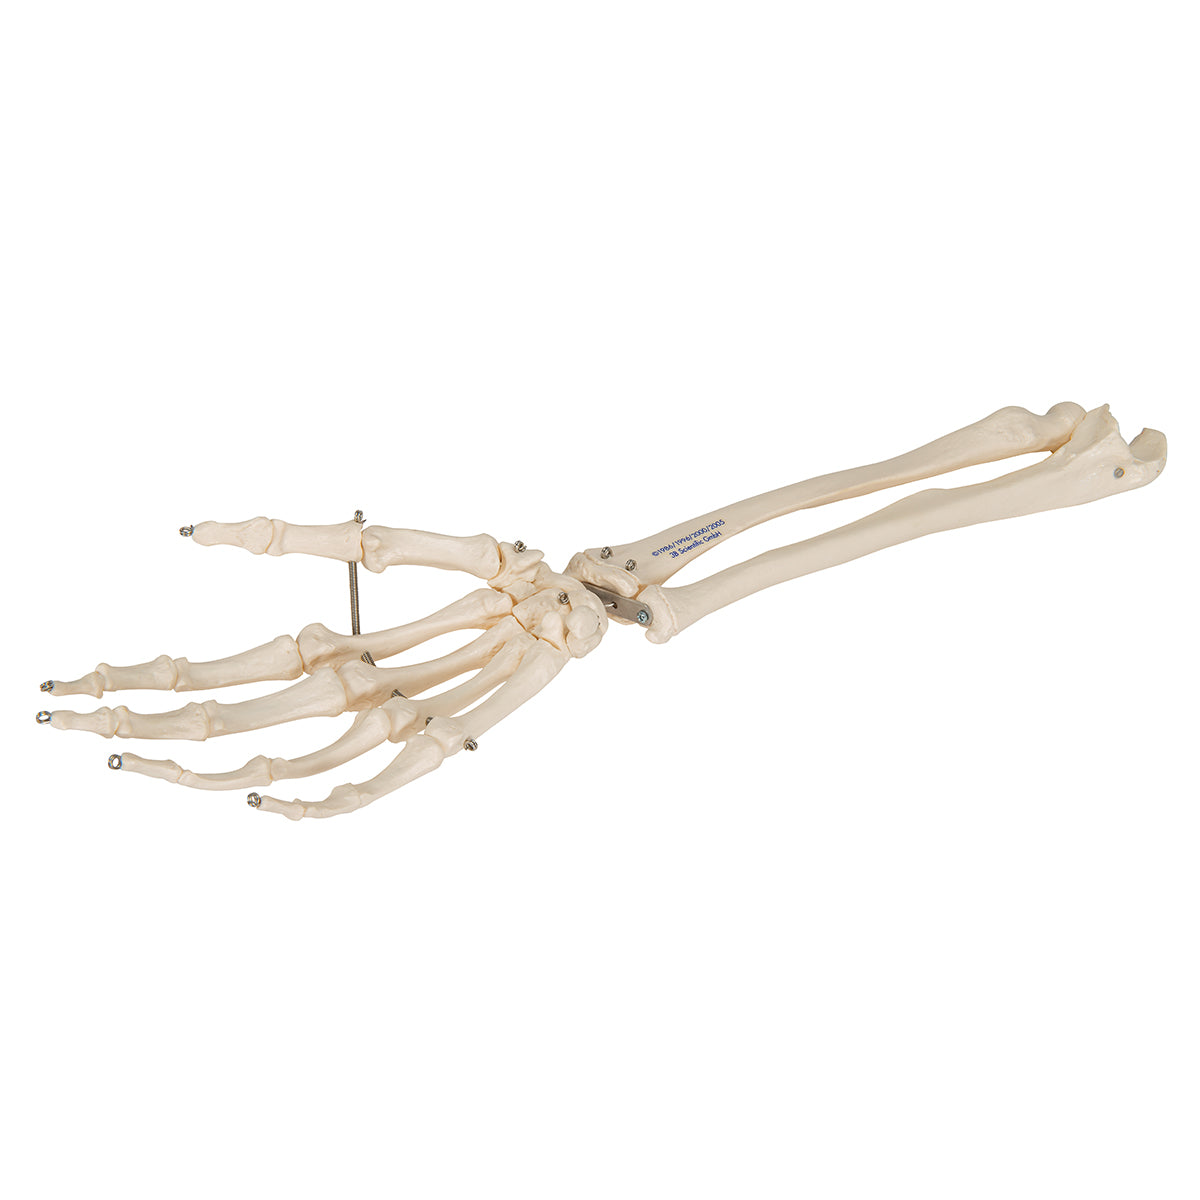 Model of the skeleton of the hand and both forearm bones